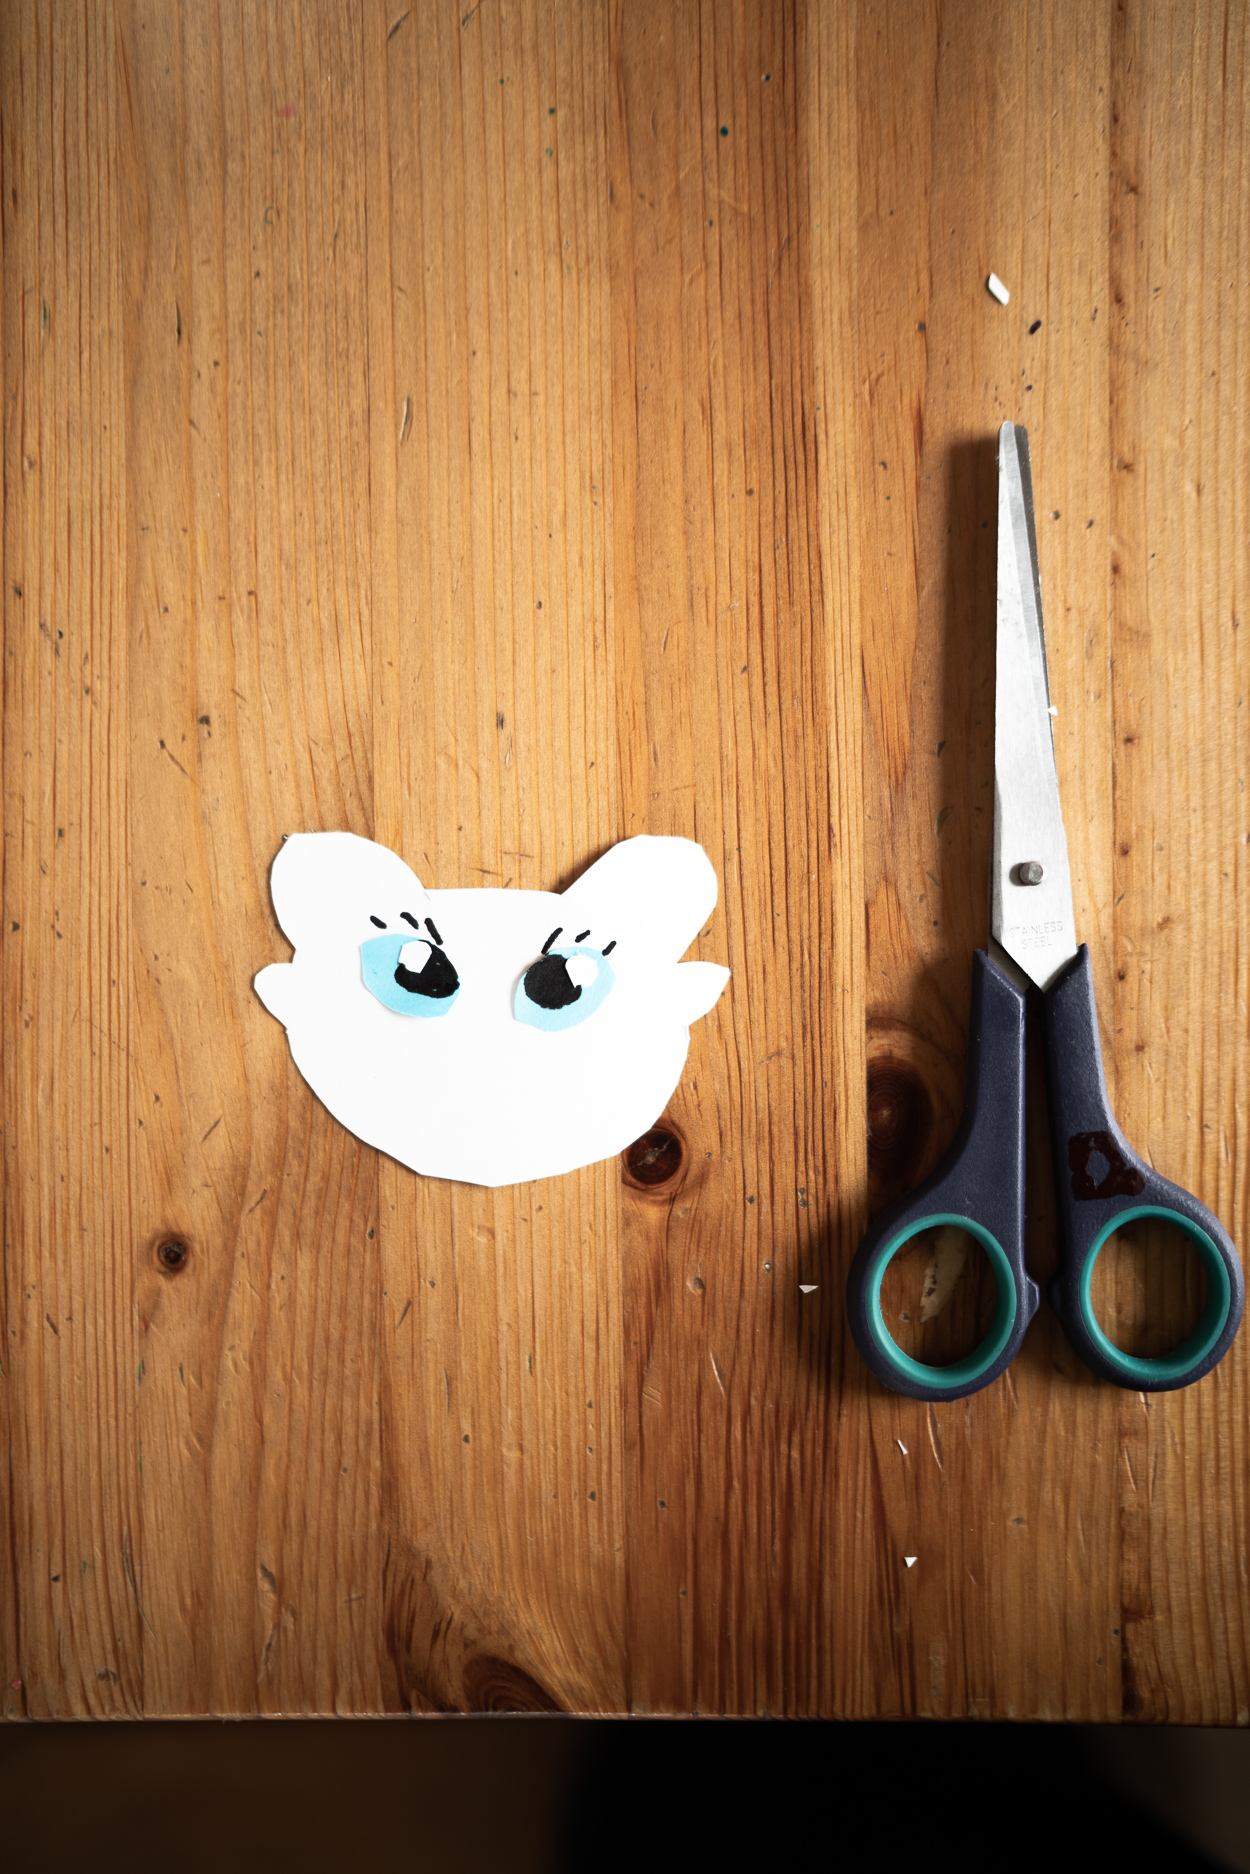 Draw and cut off a head out of white paper, add bright blue eyes using a glue stick. Take a black sharpie and draw the apples of the eyes, then add specks of white paper and eyelashes